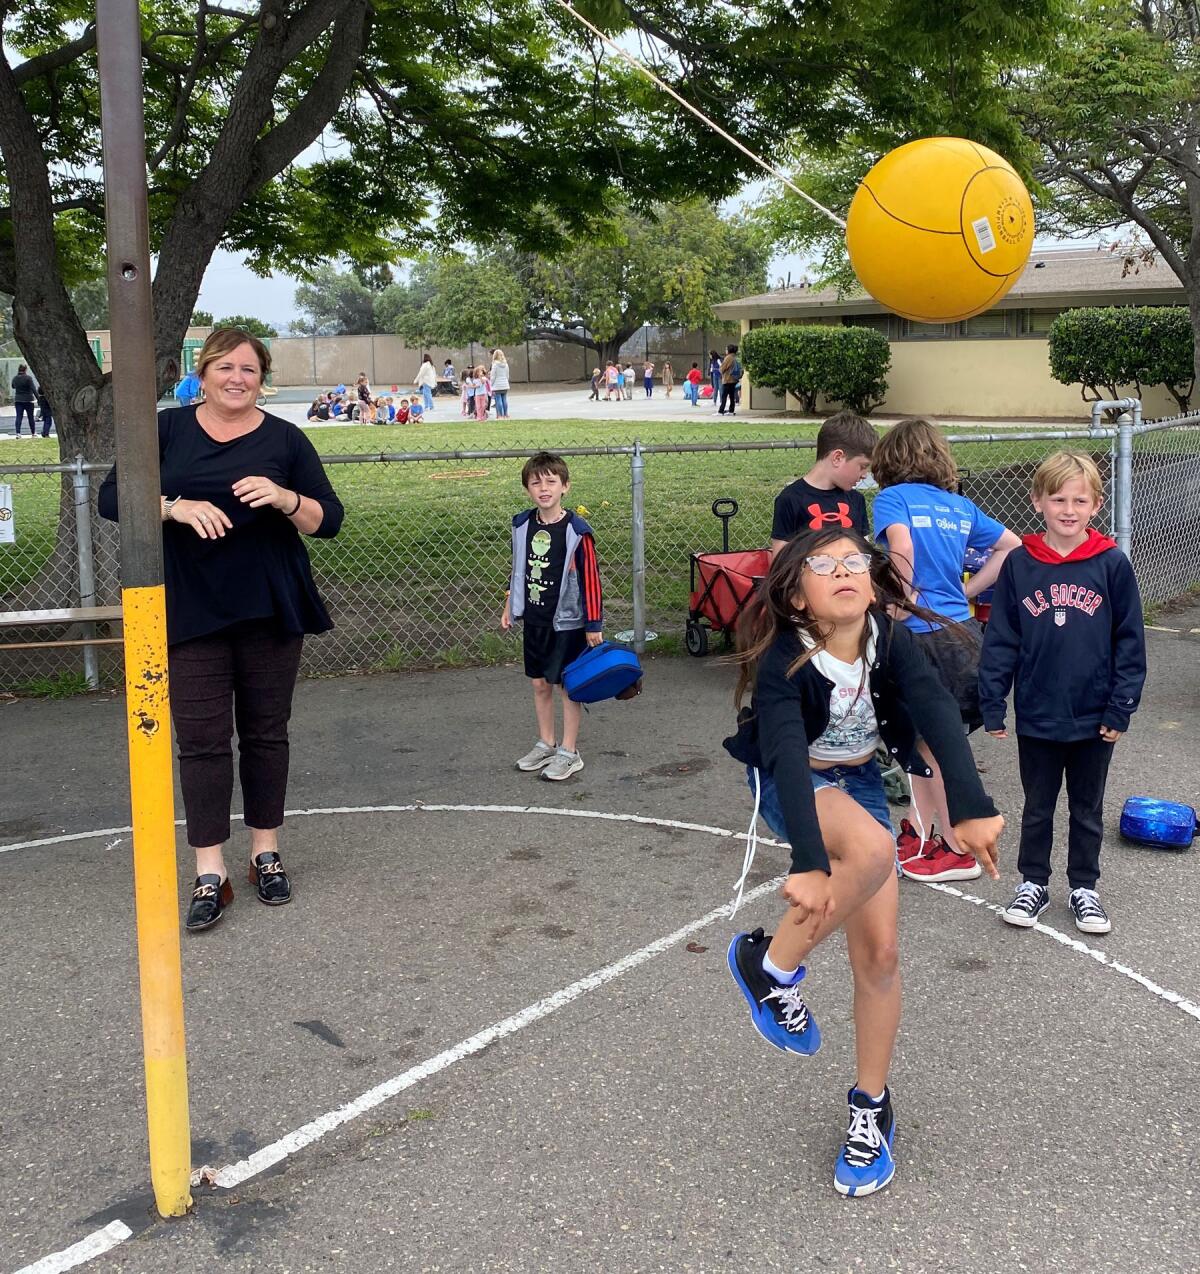 Principal Elizabeth Ward enjoying an enthusiastic game of lunch time tetherball with Sessions student Lily Martinez.